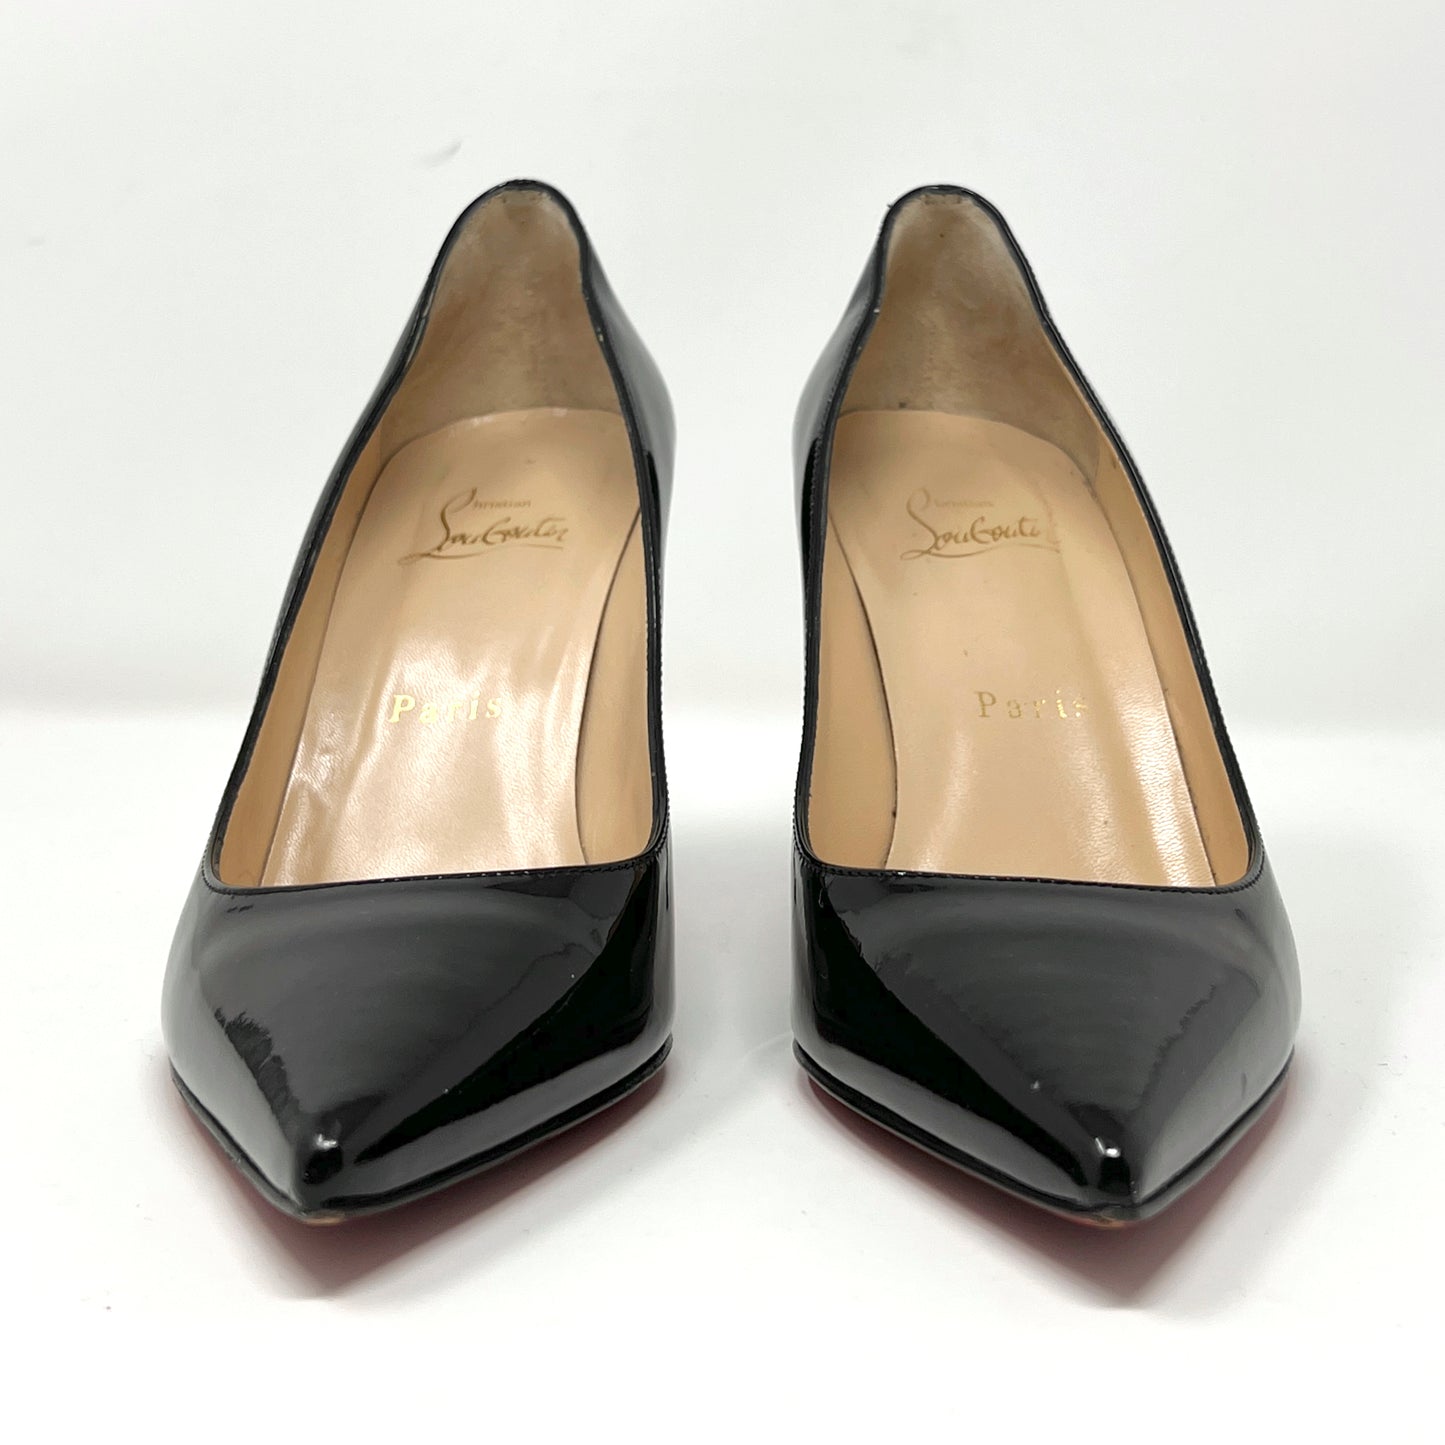 Christian Louboutin Black Patent Leather Kate 100 Pointed Toe Heels Pumps Size EU 36.5